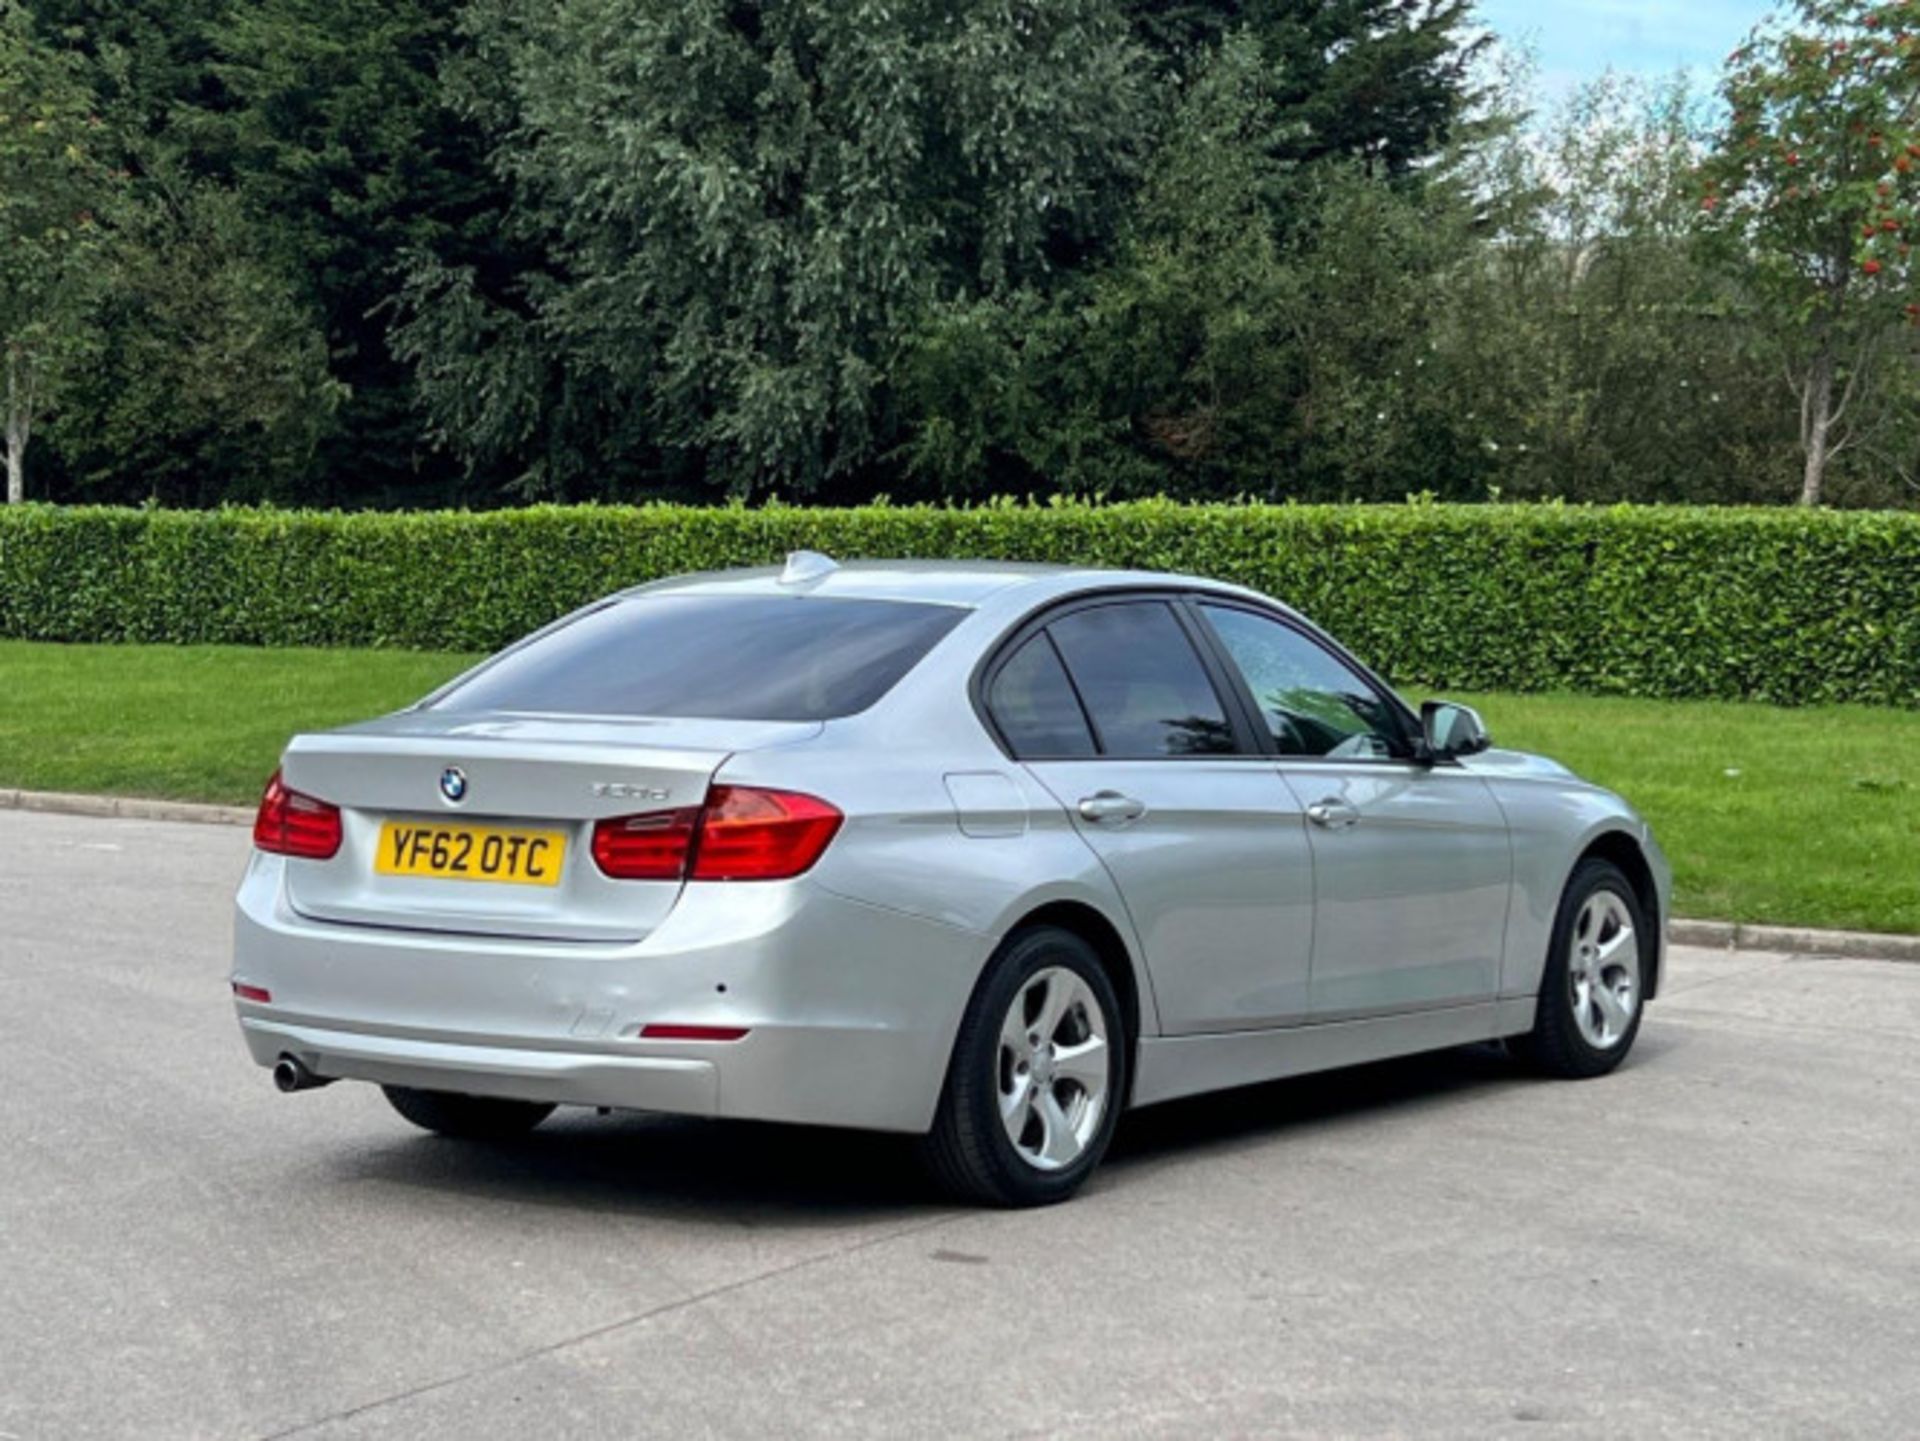 BMW 3 SERIES 2.0 DIESEL ED START STOP - A WELL-MAINTAINED GEM >>--NO VAT ON HAMMER--<< - Image 7 of 229